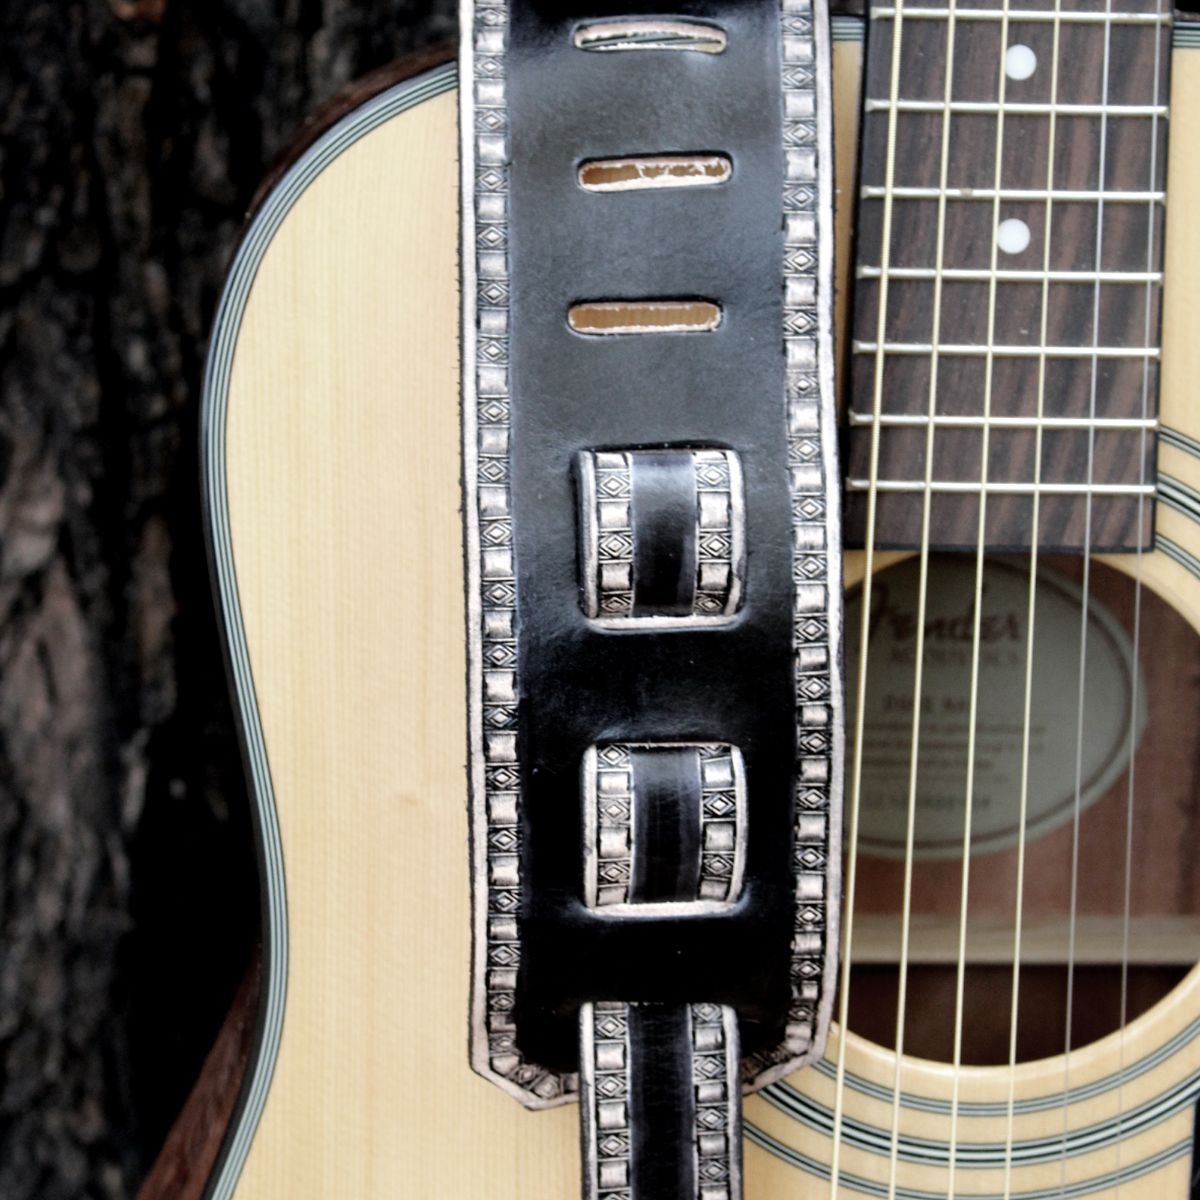 3 Wide Perfect for Electric Carbon Black Color Adjustable Length Between 40-59 inches Acoustic and Bass Guitars Birch & Smith Full Grain Leather Guitar Strap Padded 